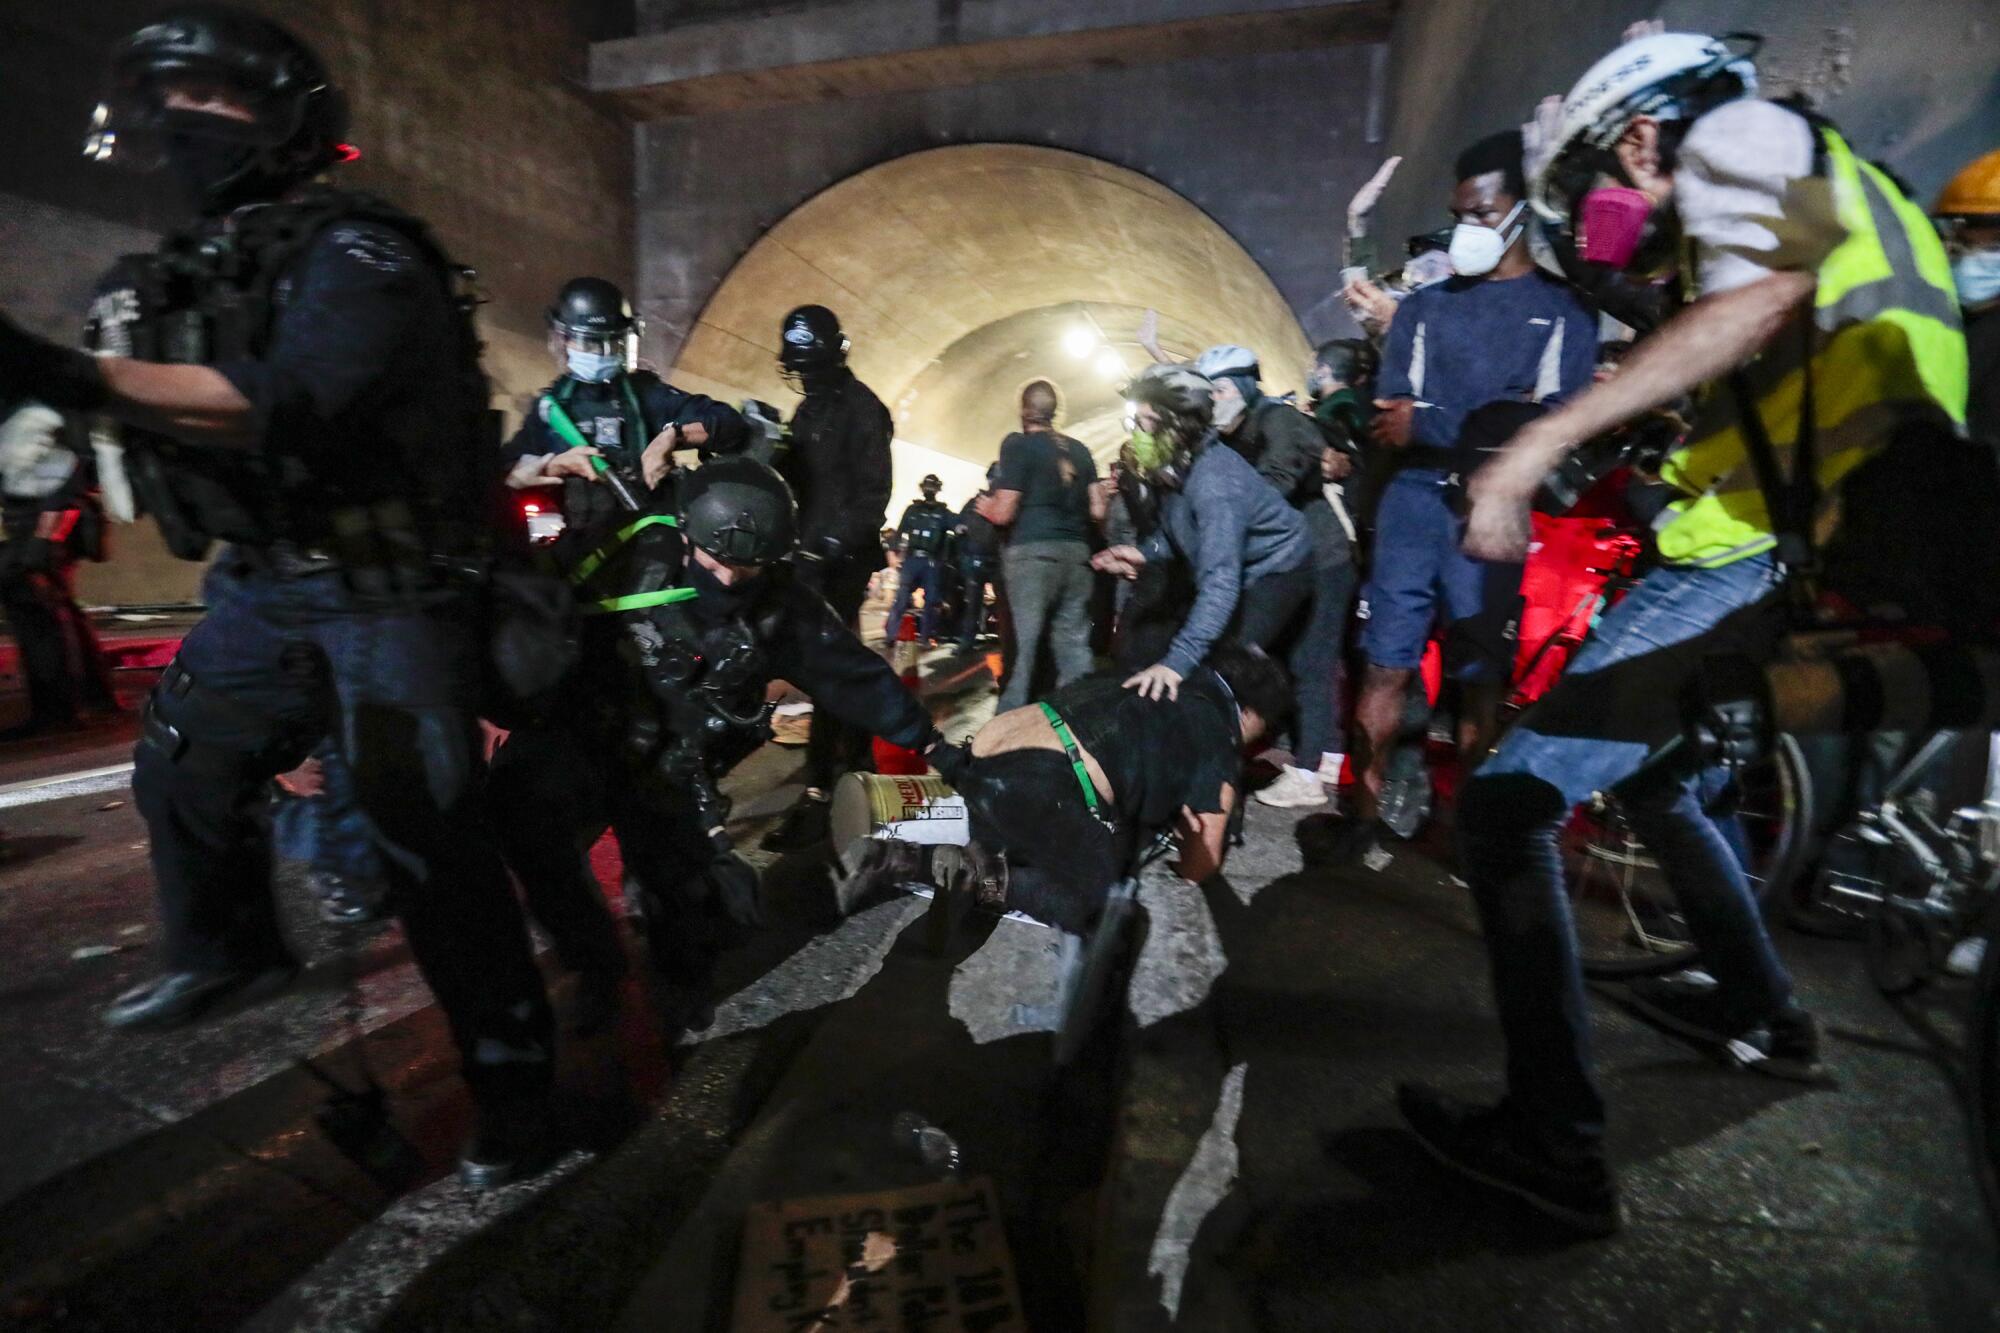 A protester is chased by an LAPD officer as police converge on demonstrators in the 3rd Street tunnel.